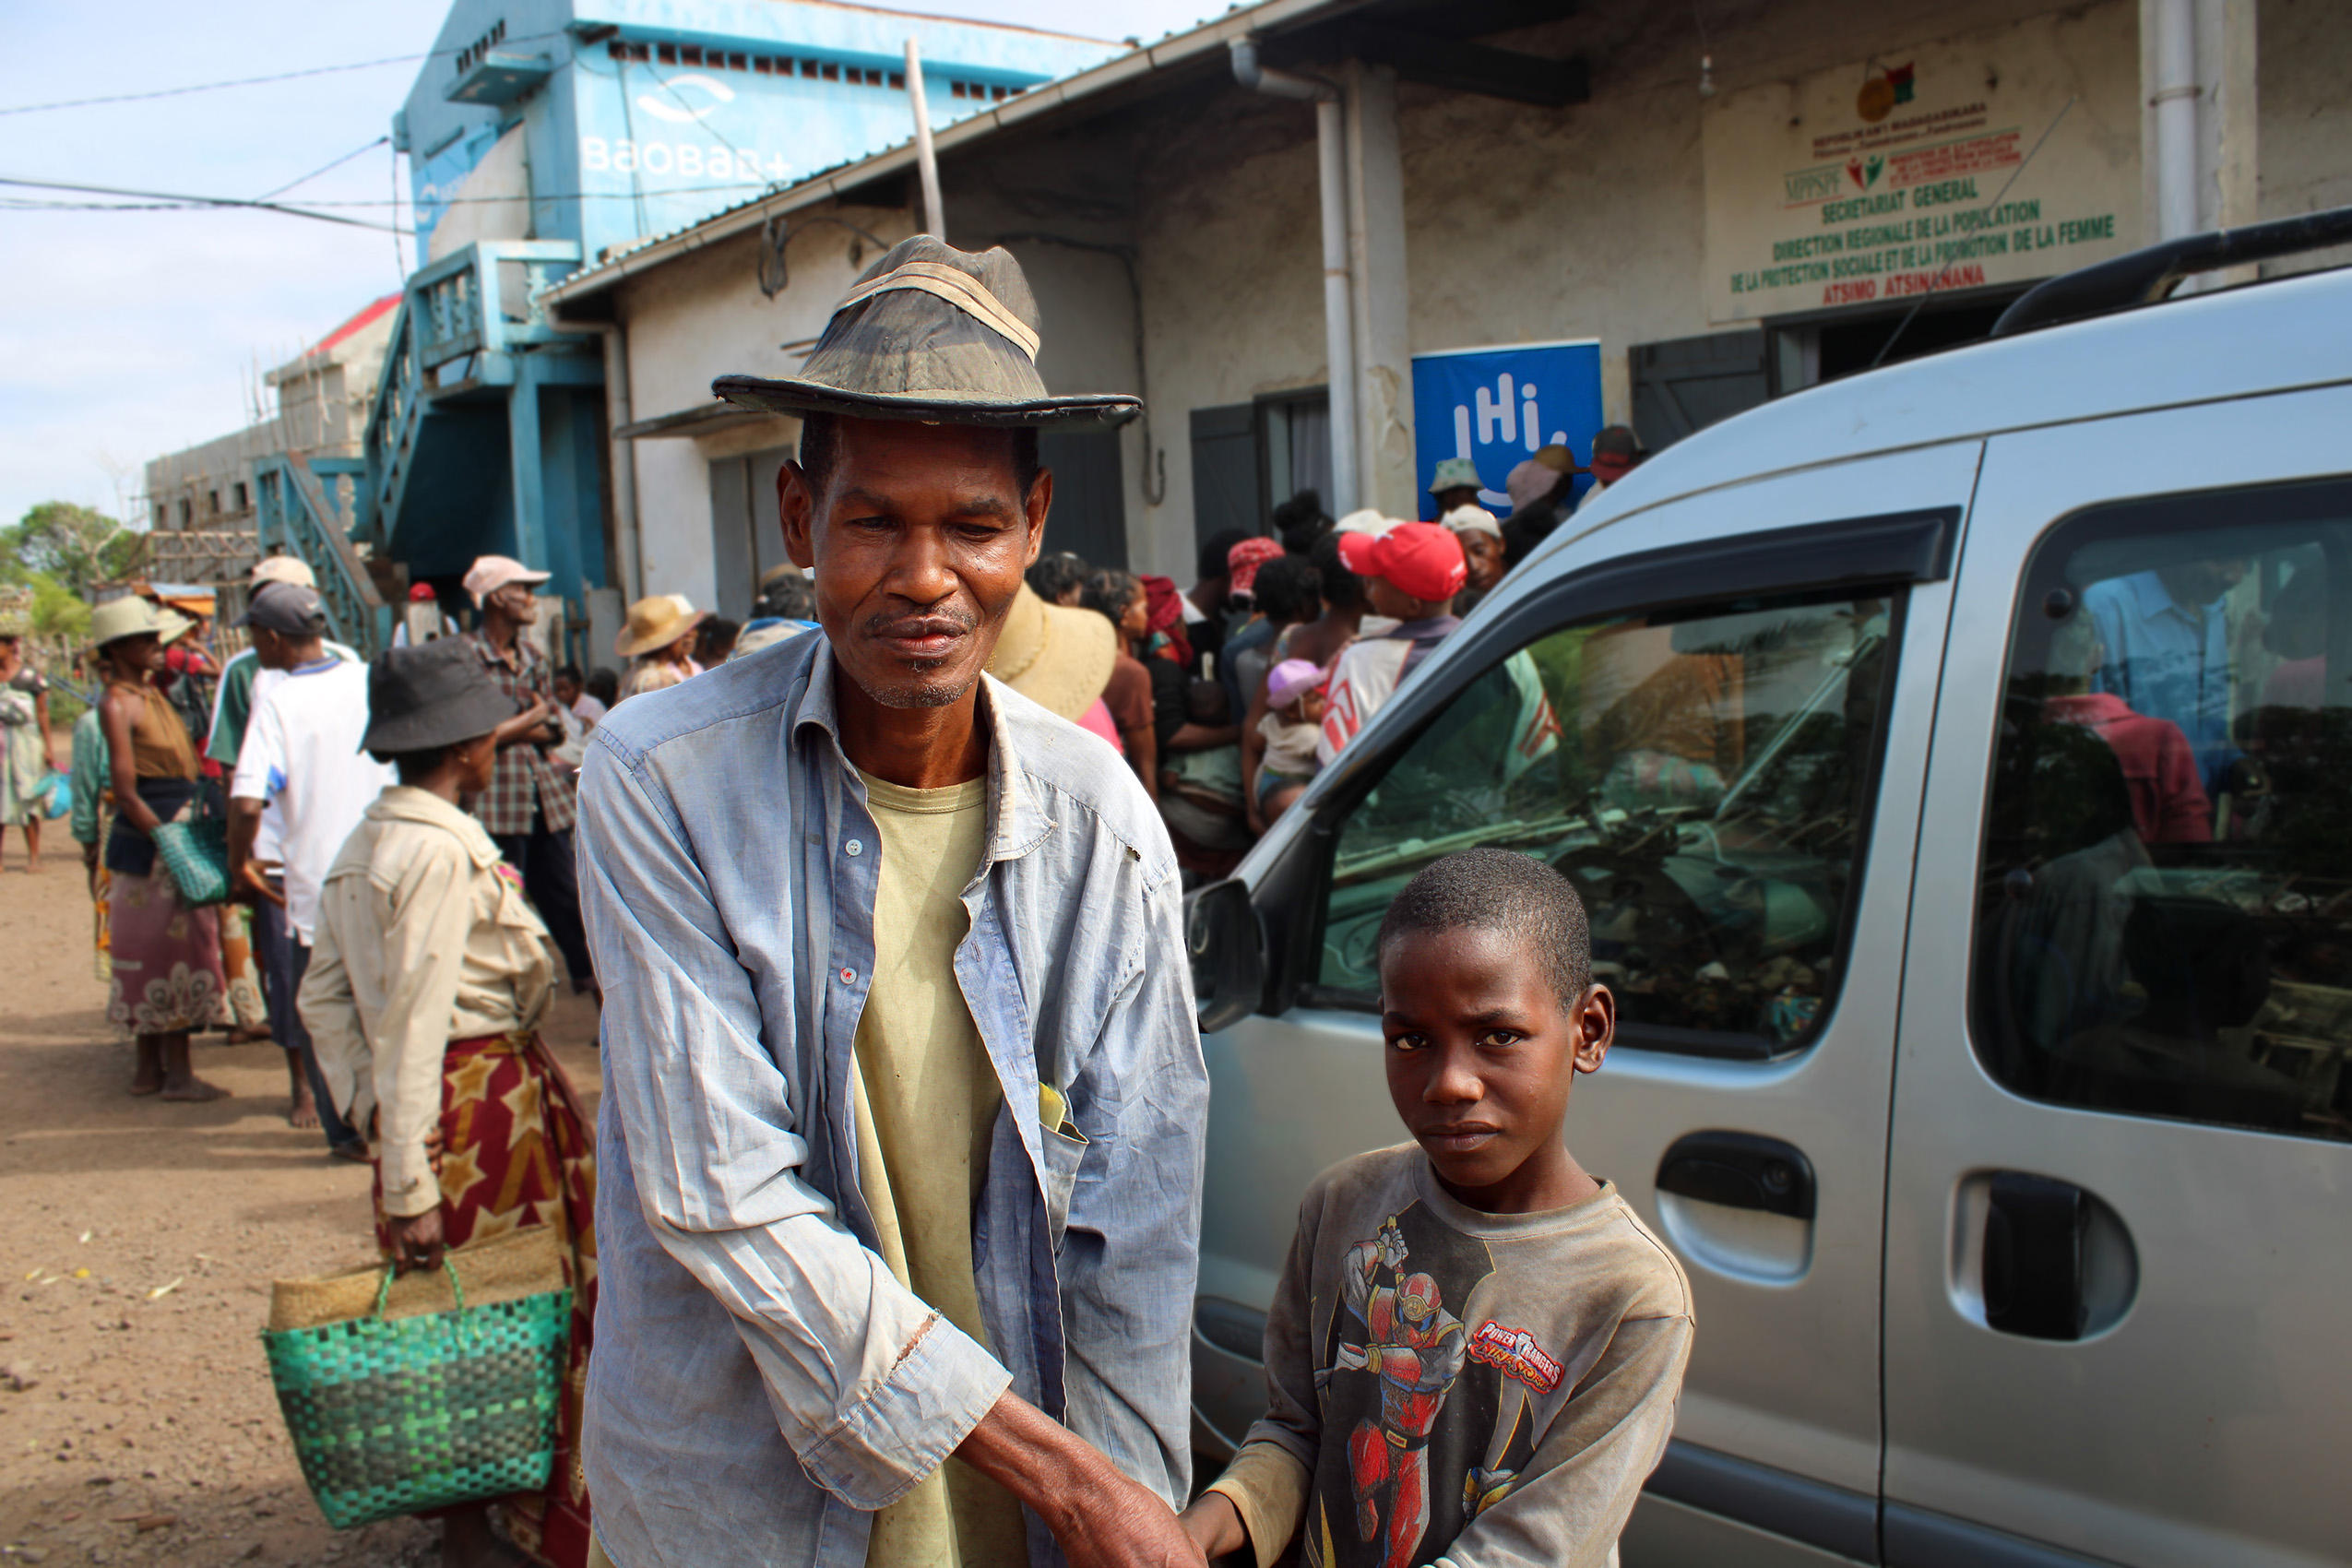 Beni Jean and his son prepare to return home after being displaced by the storm. ©H.Andrianjatovo / HI